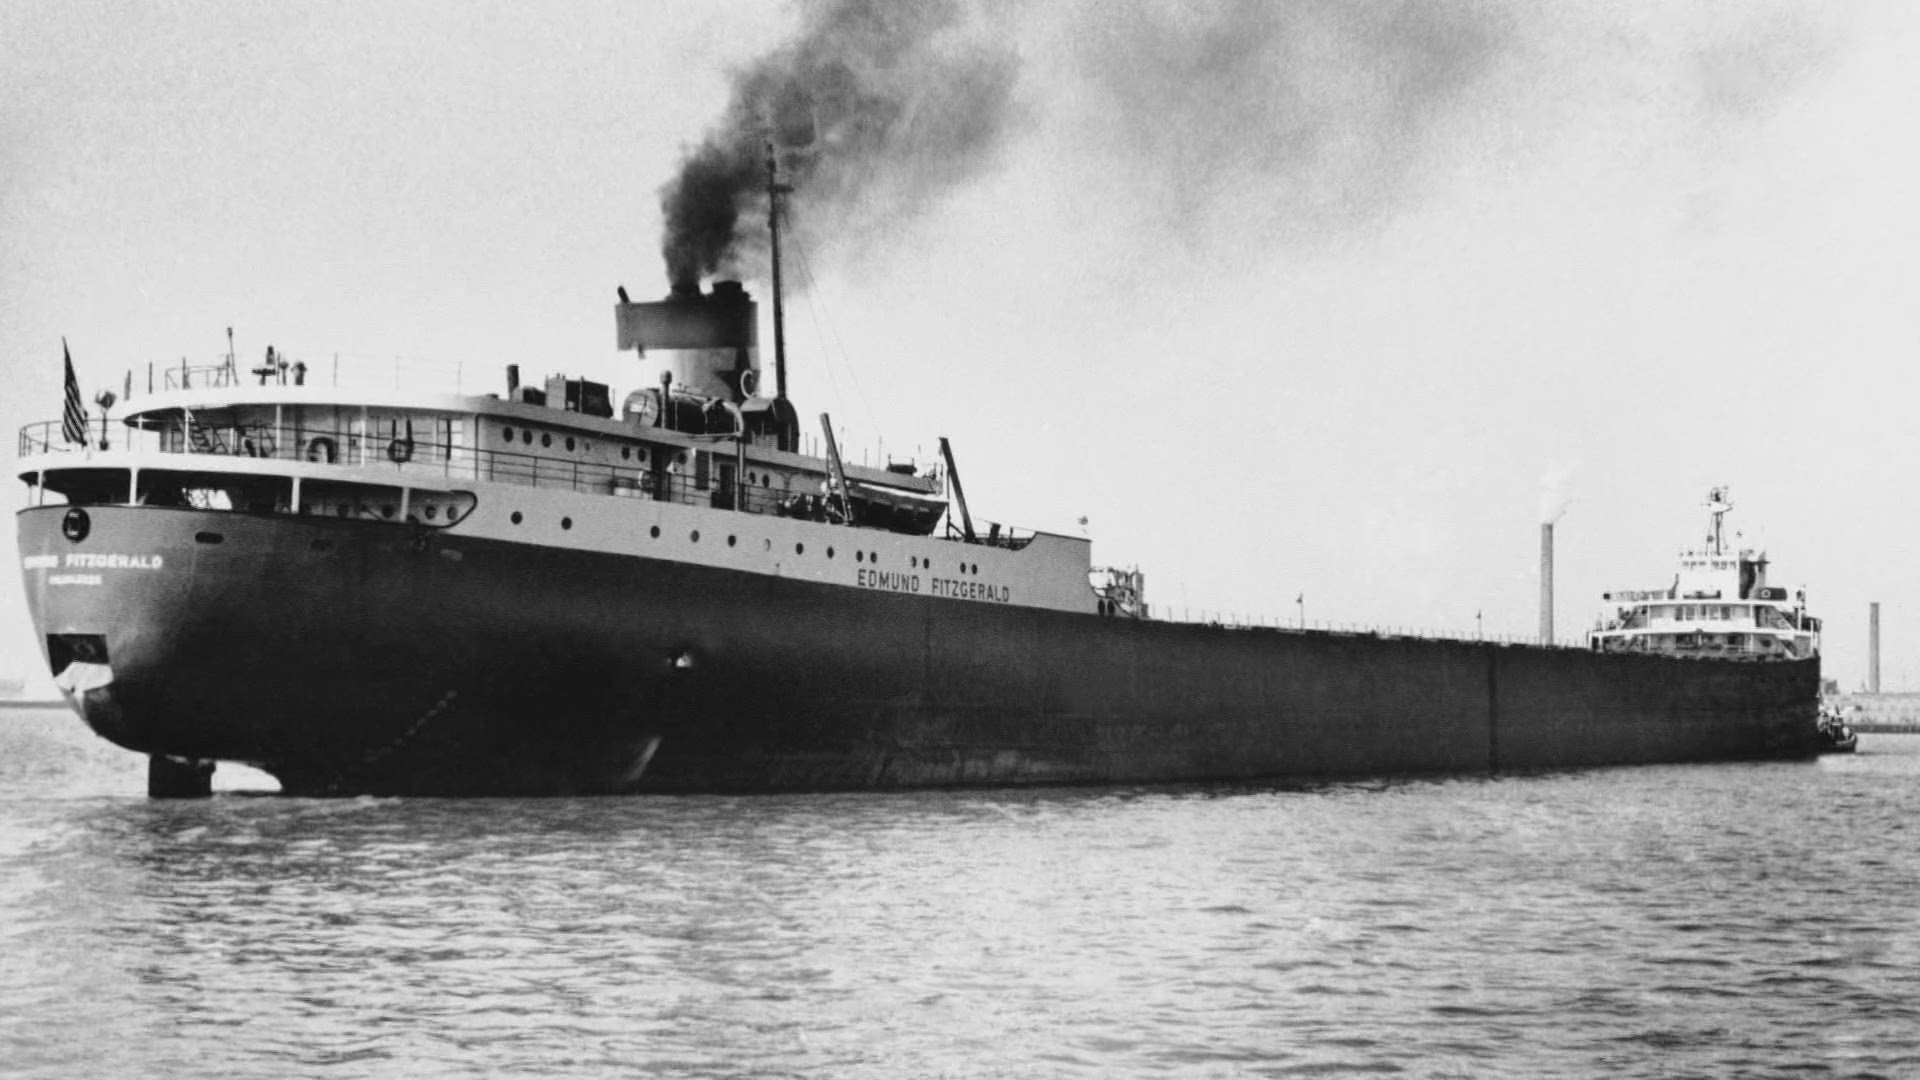 The maritime tragedy was 45 years ago -- the Edmund Fitzgerald found itself caught in a storm, ultimately sinking in Lake Superior on November 10, 1975.